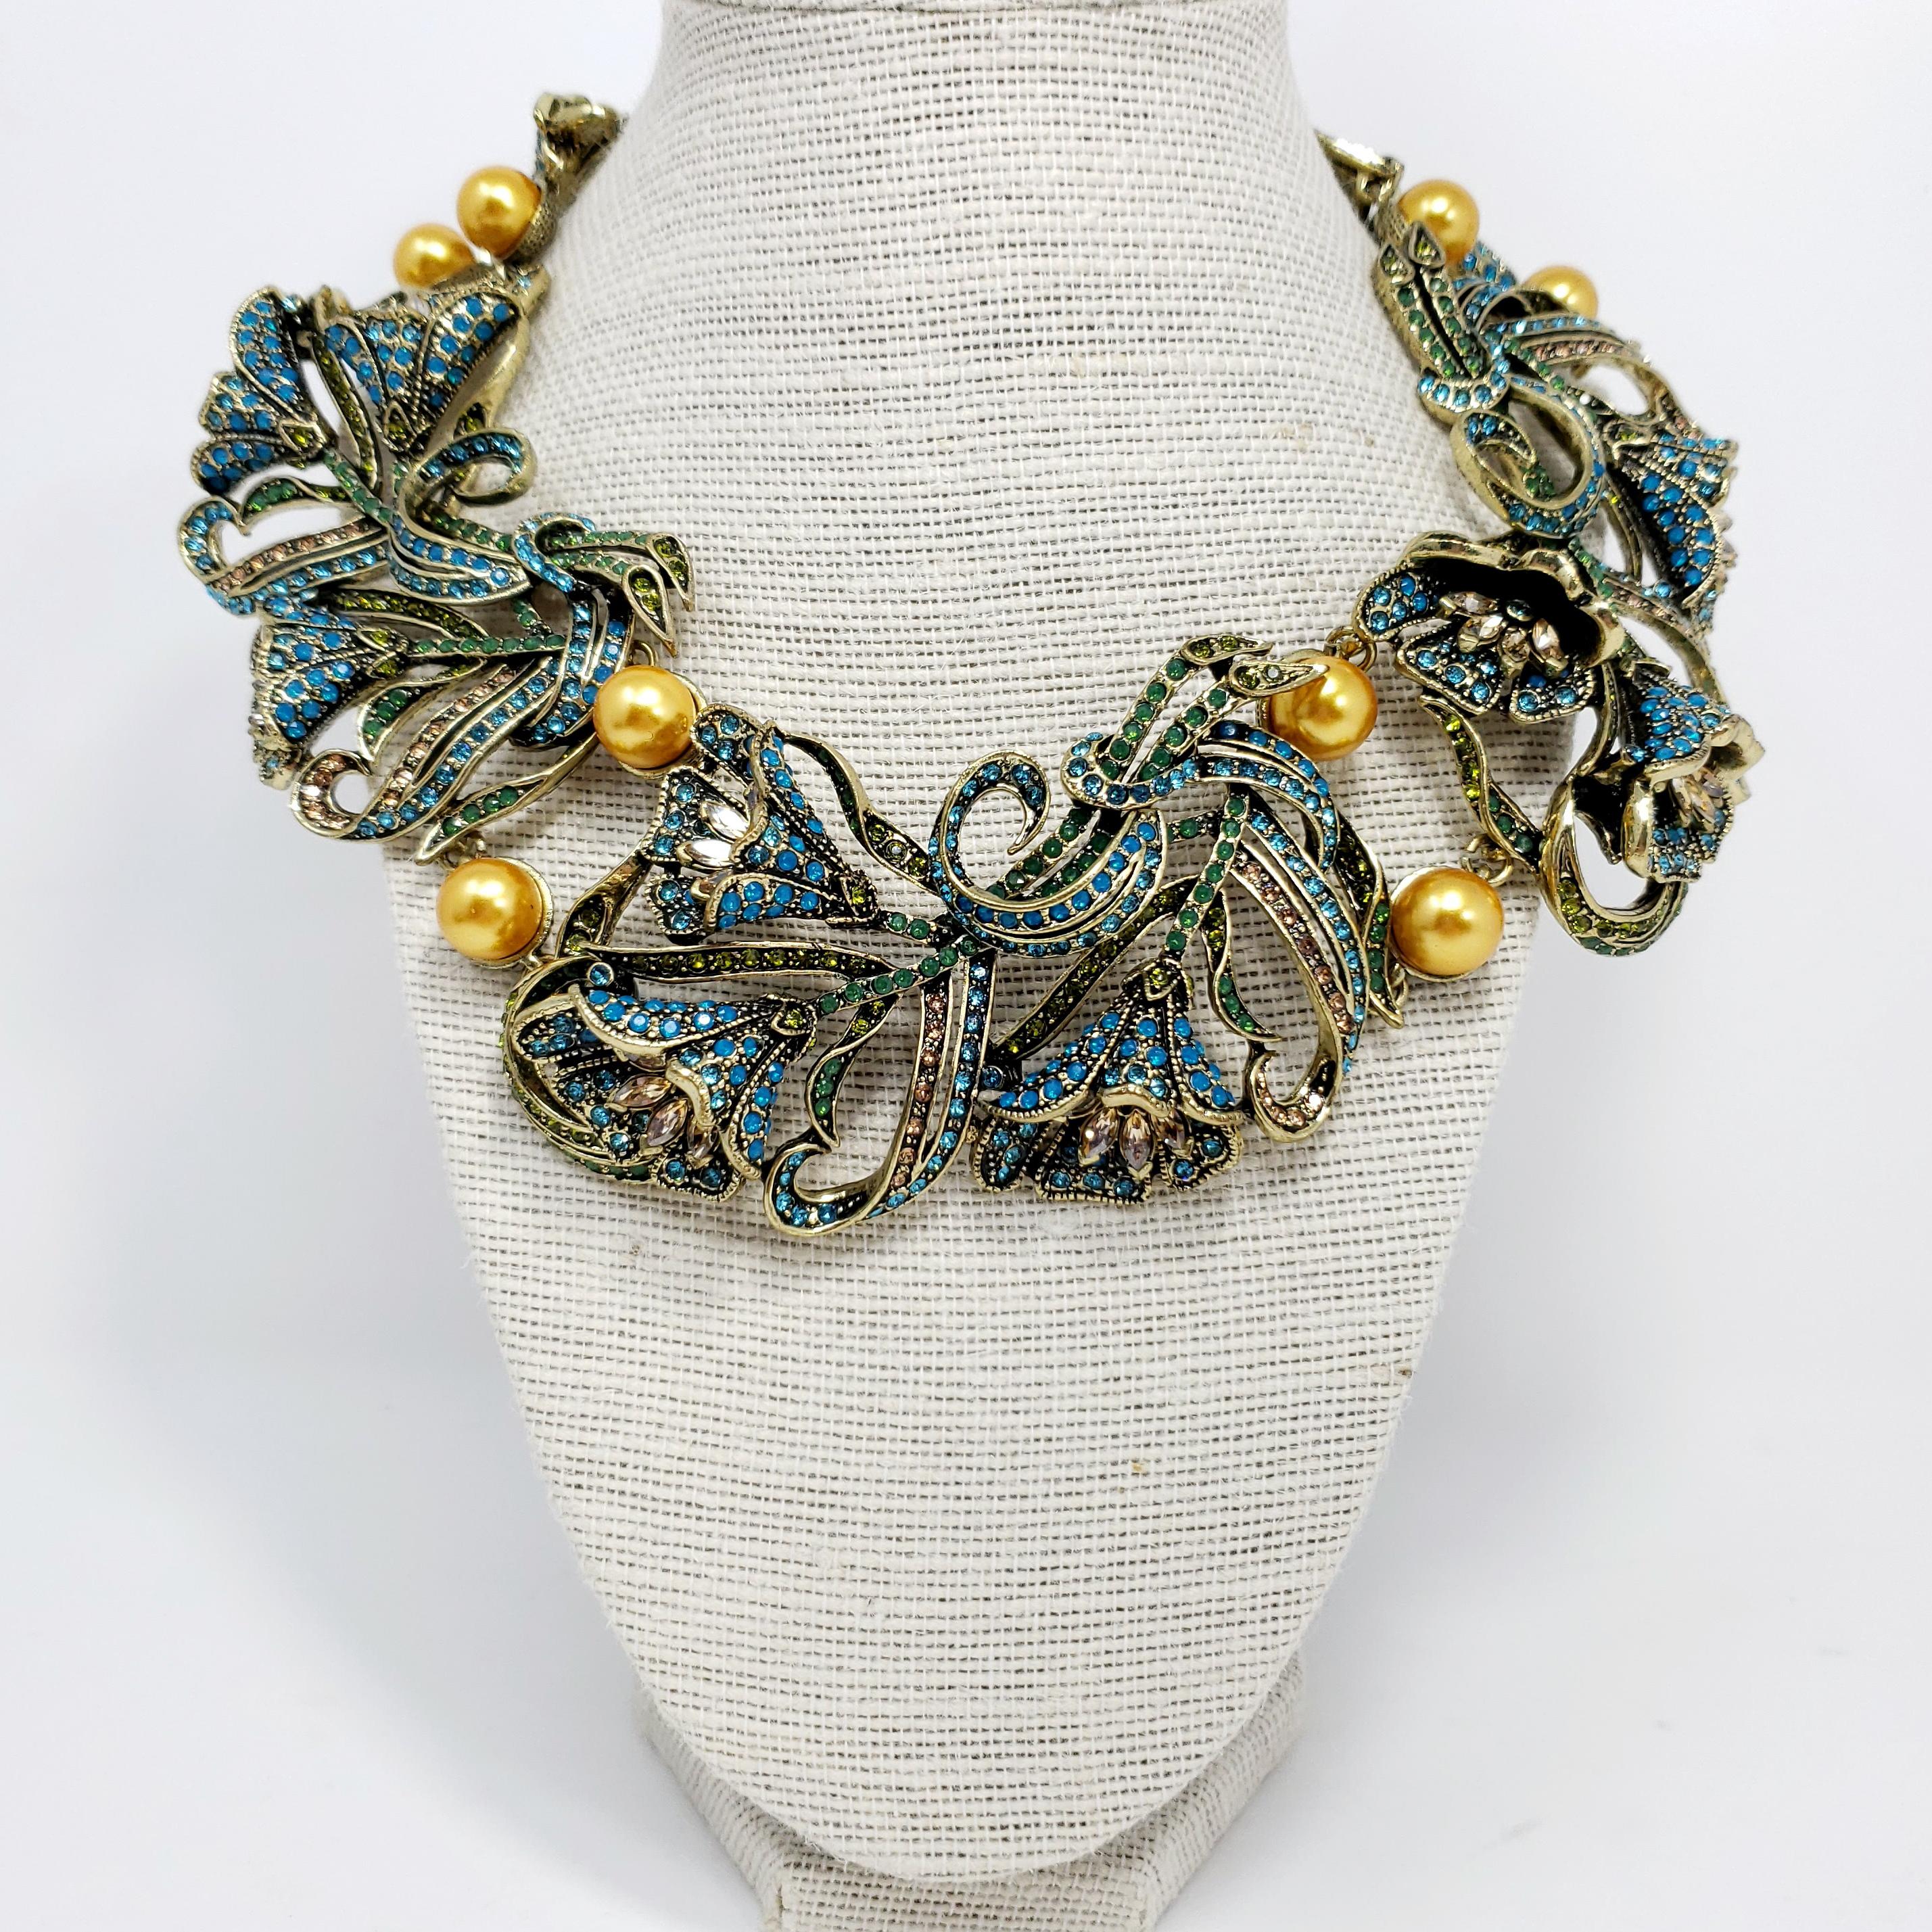 Let your jewelry wardrobe blossom with this jeweled Heidi Daus necklace. Links of extravagant, crystal-encrusted tulips decorated with pairs of faux pearls in between.

Clear, olivine, and turquoise crystals.

Length: 40 cm / 15.5 in around, plus 9